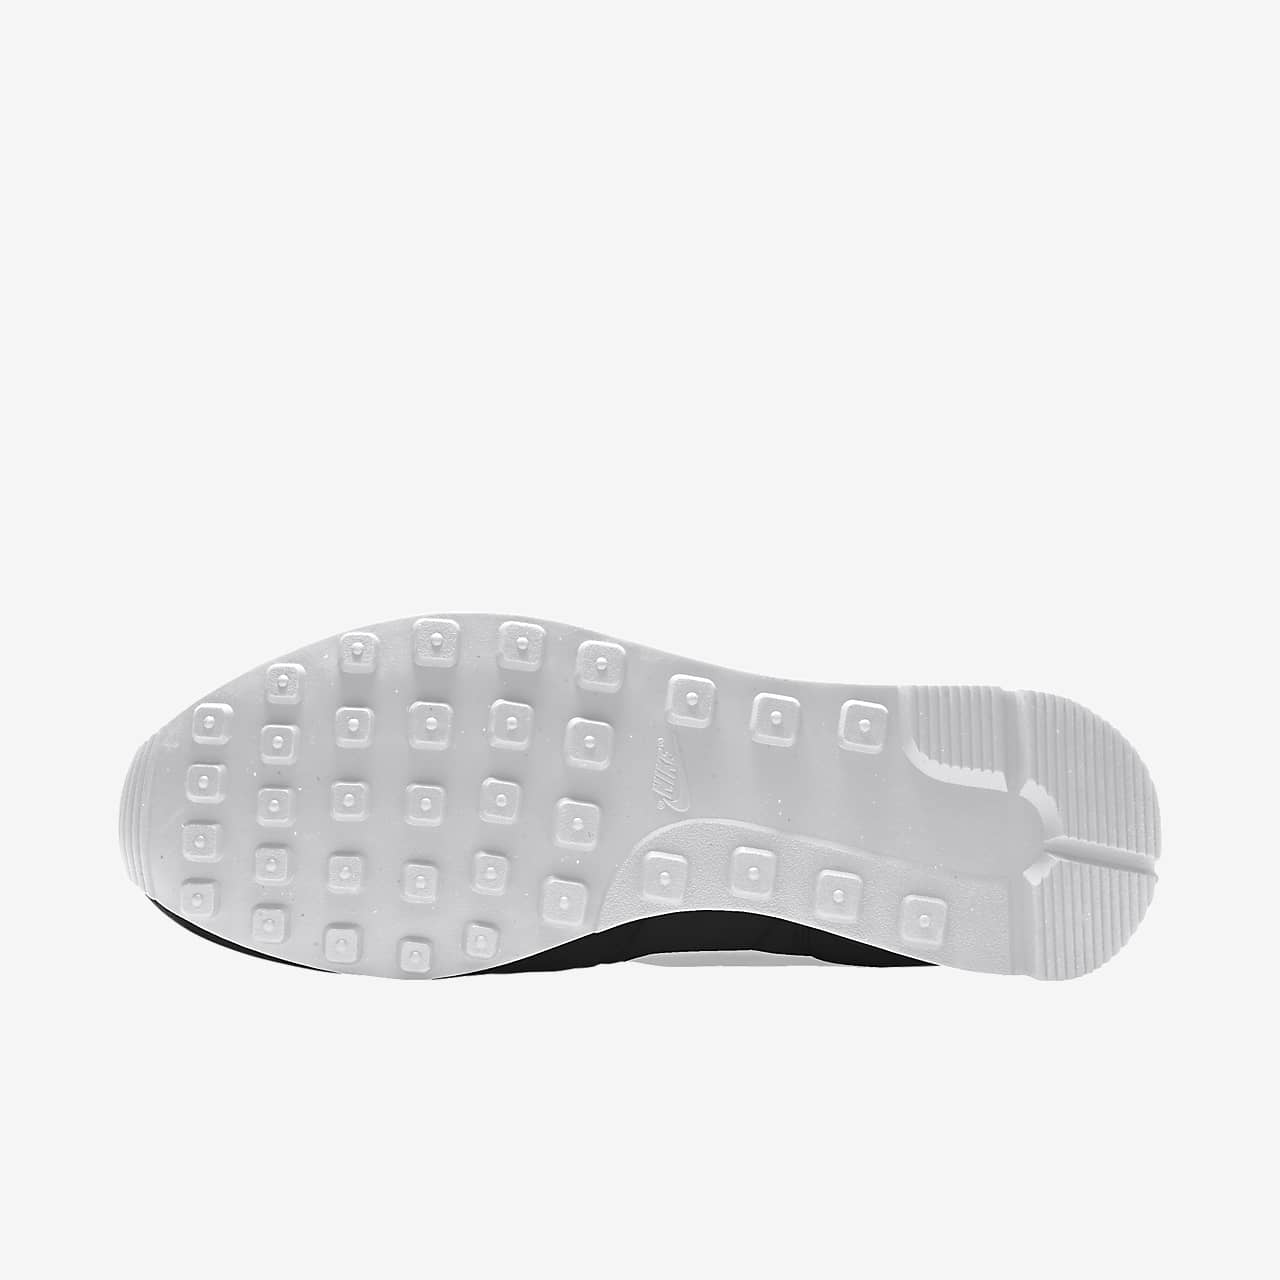 Buscar China Chaise longue Nike Internationalist By You Zapatillas personalizables - Hombre. Nike ES